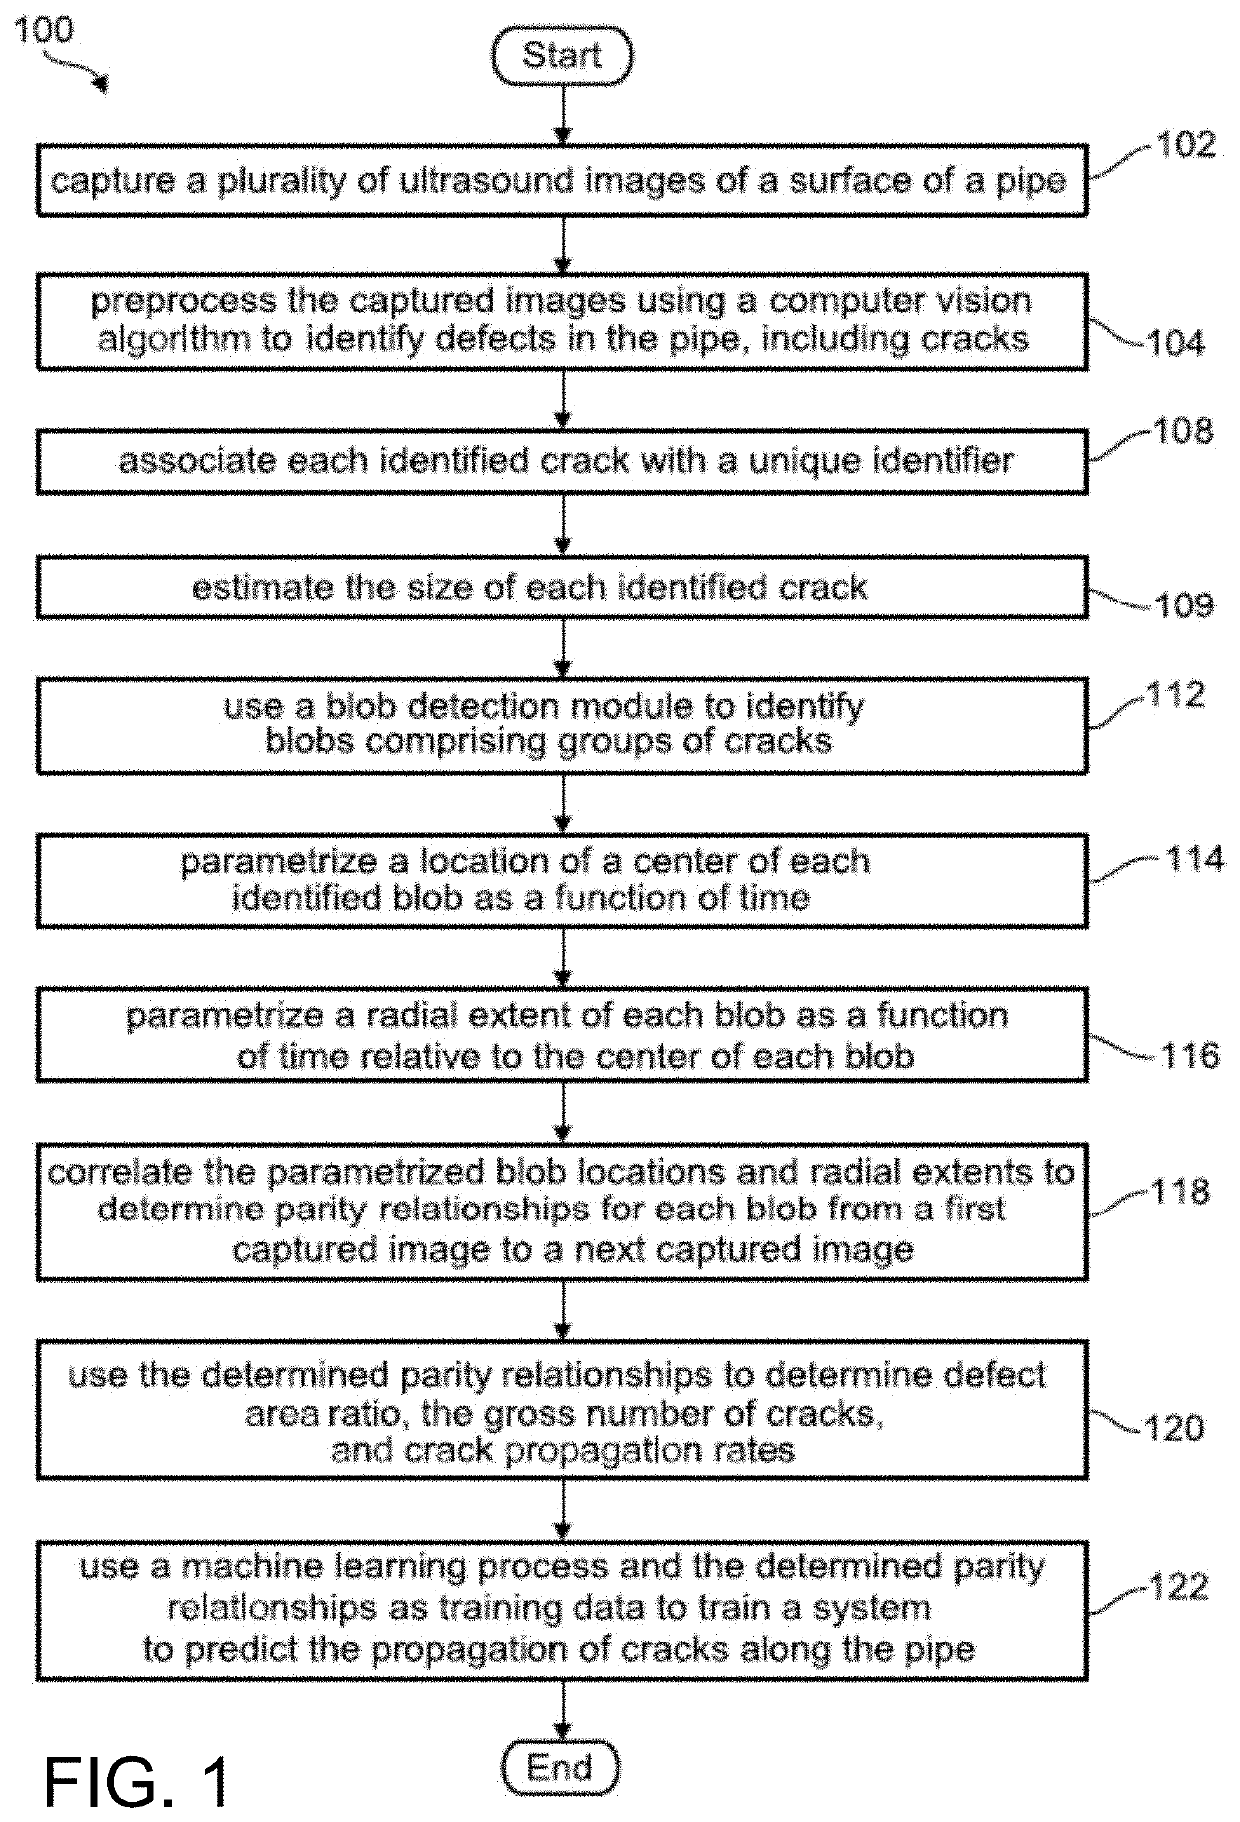 Method for automated crack detection and analysis using ultrasound images